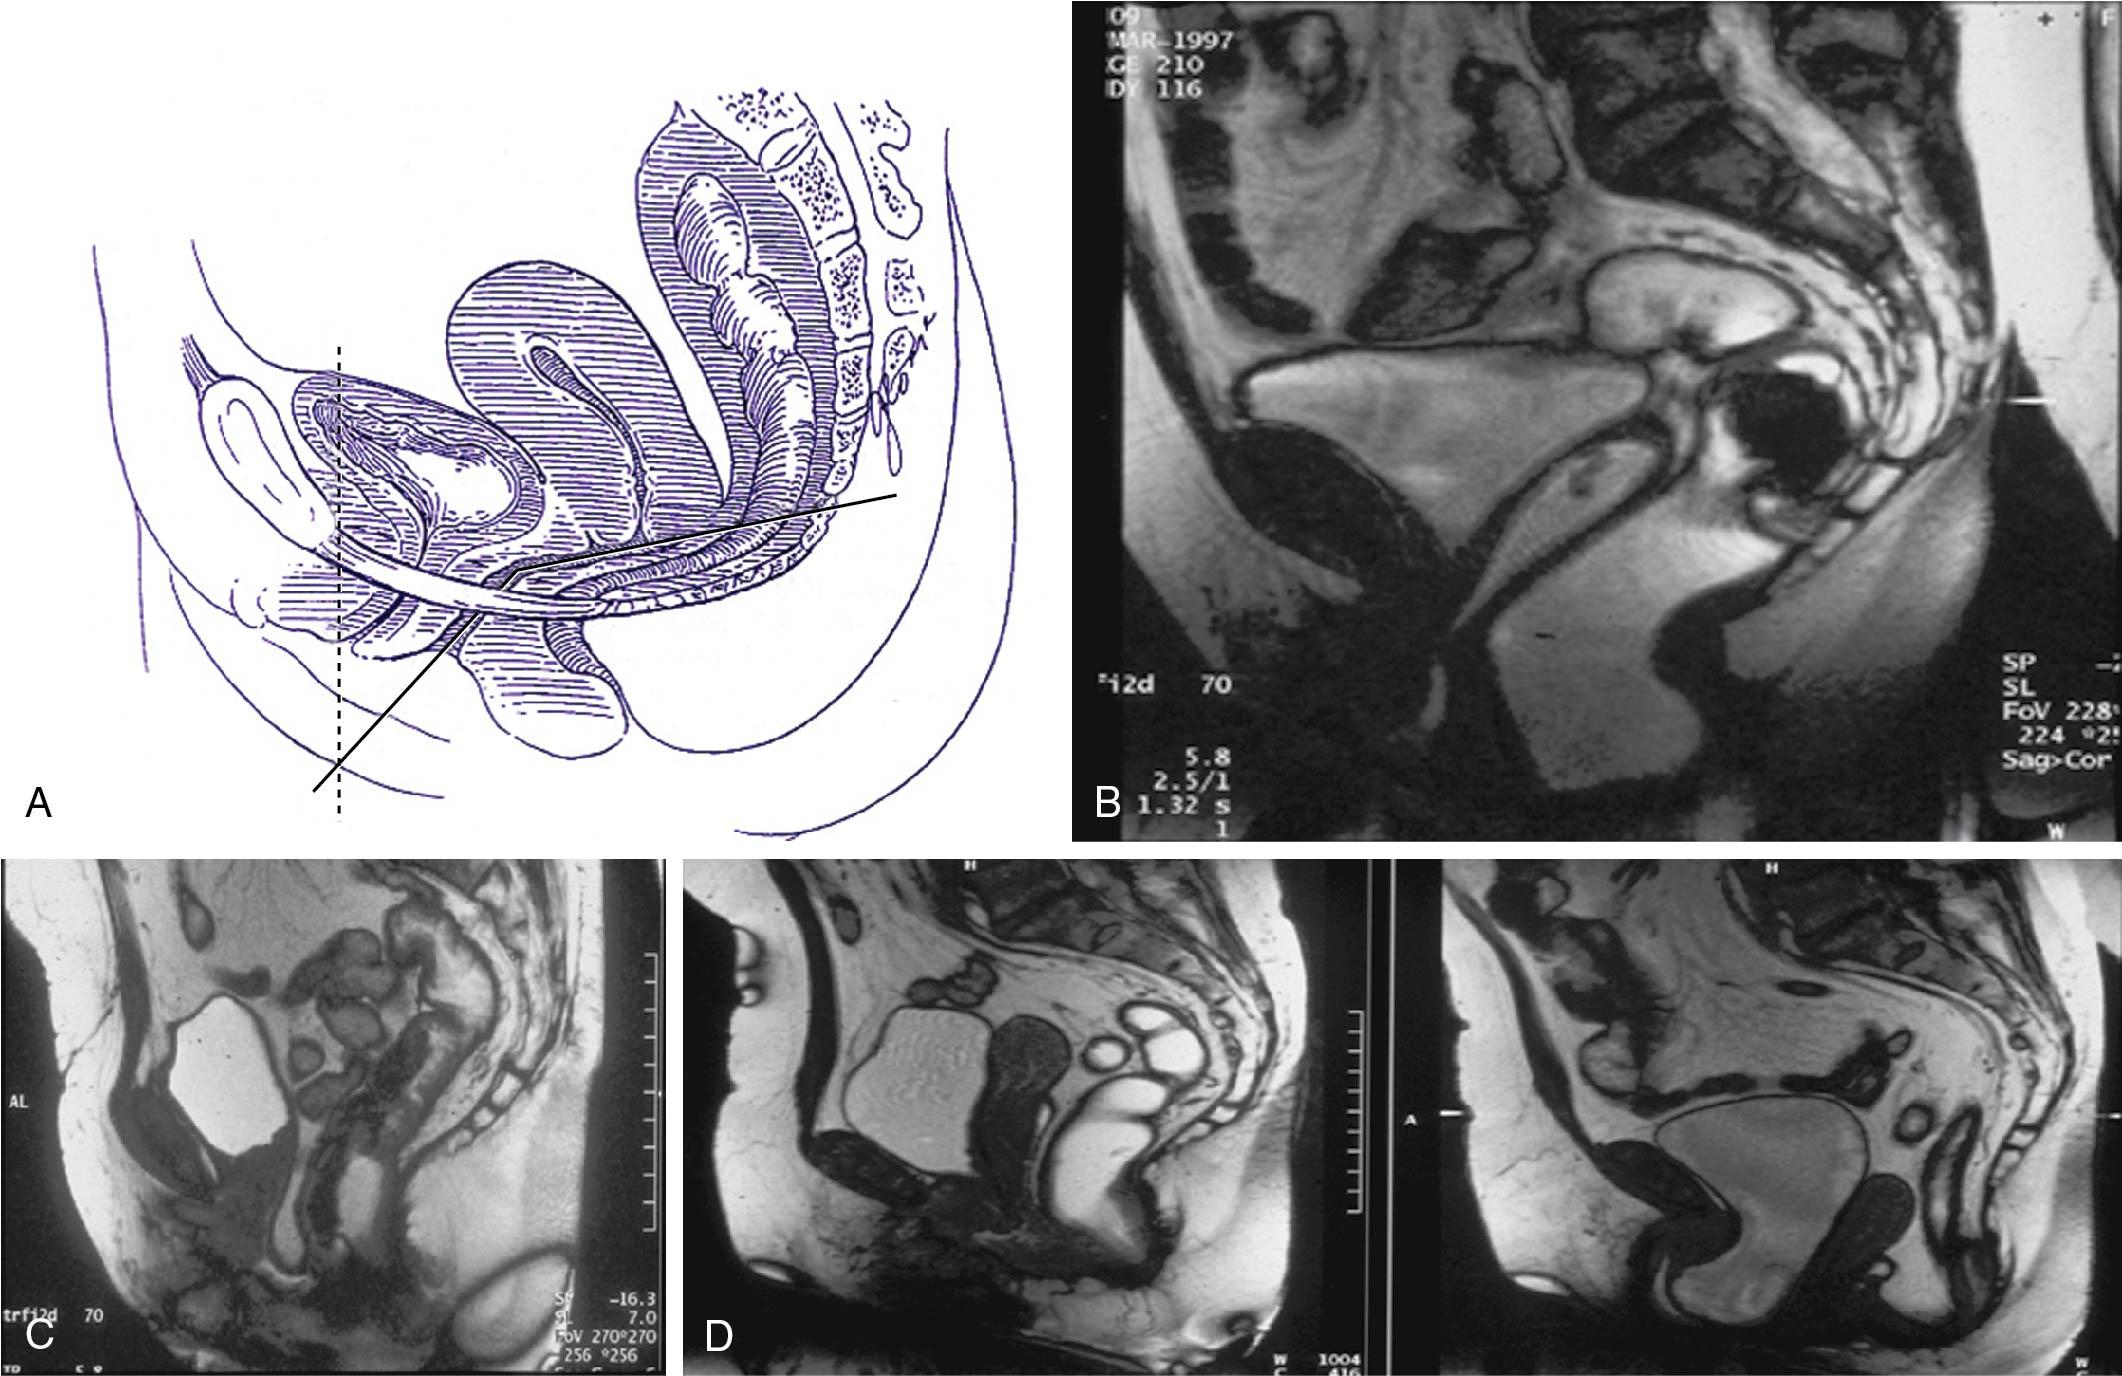 Fig. 20.10, A and B, In the nulliparous patient, the lower one-third of the vagina is oriented more vertically, whereas the upper two-thirds deviate horizontally, thereby maintaining the vaginal axis in an almost horizontal position. C, During stressful maneuvers such as coughing or straining, the levator hiatus is shortened anteriorly by contraction of the pubococcygeus muscles. D, In the case of genital prolapse when the levator ani support is lost, the vaginal axis becomes more vertical, the urogenital hiatus broadens, and fascial supports are strained.